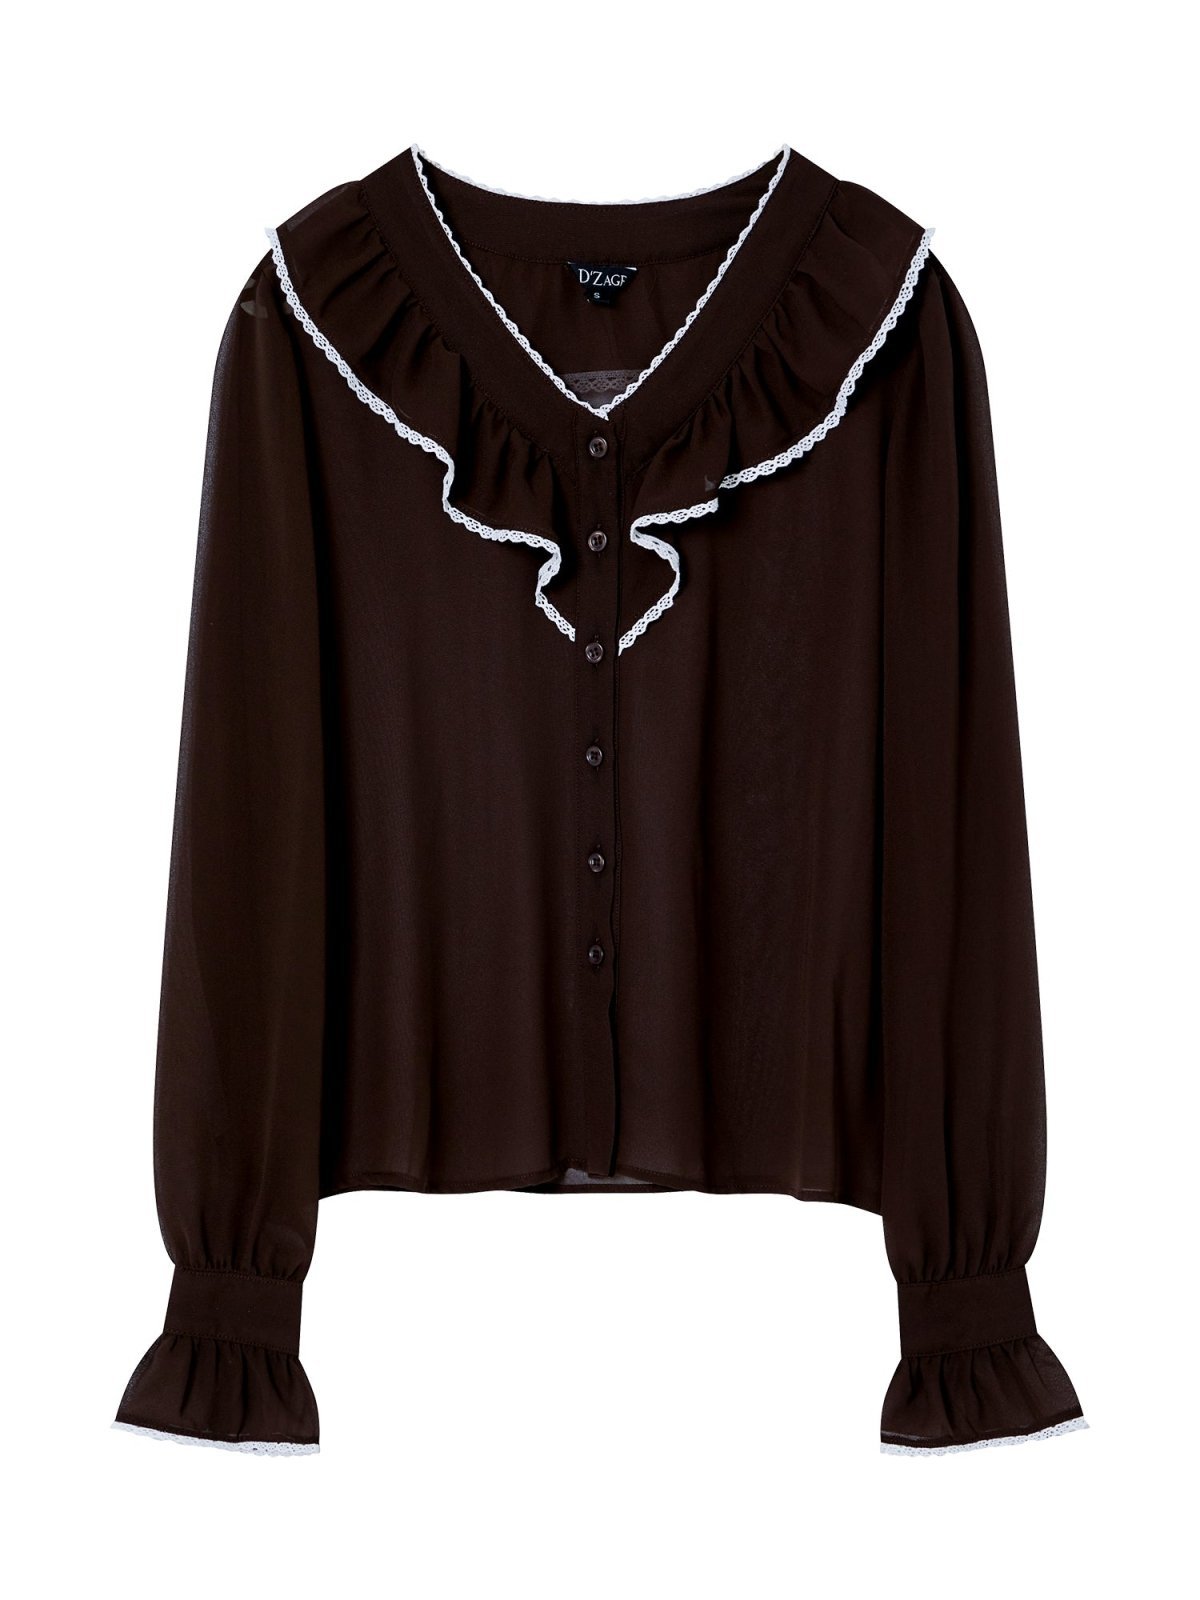 Ruffled Button-up Top - DAG-DD8726-21ChocolateS - Brownie - S - D'zage Designs